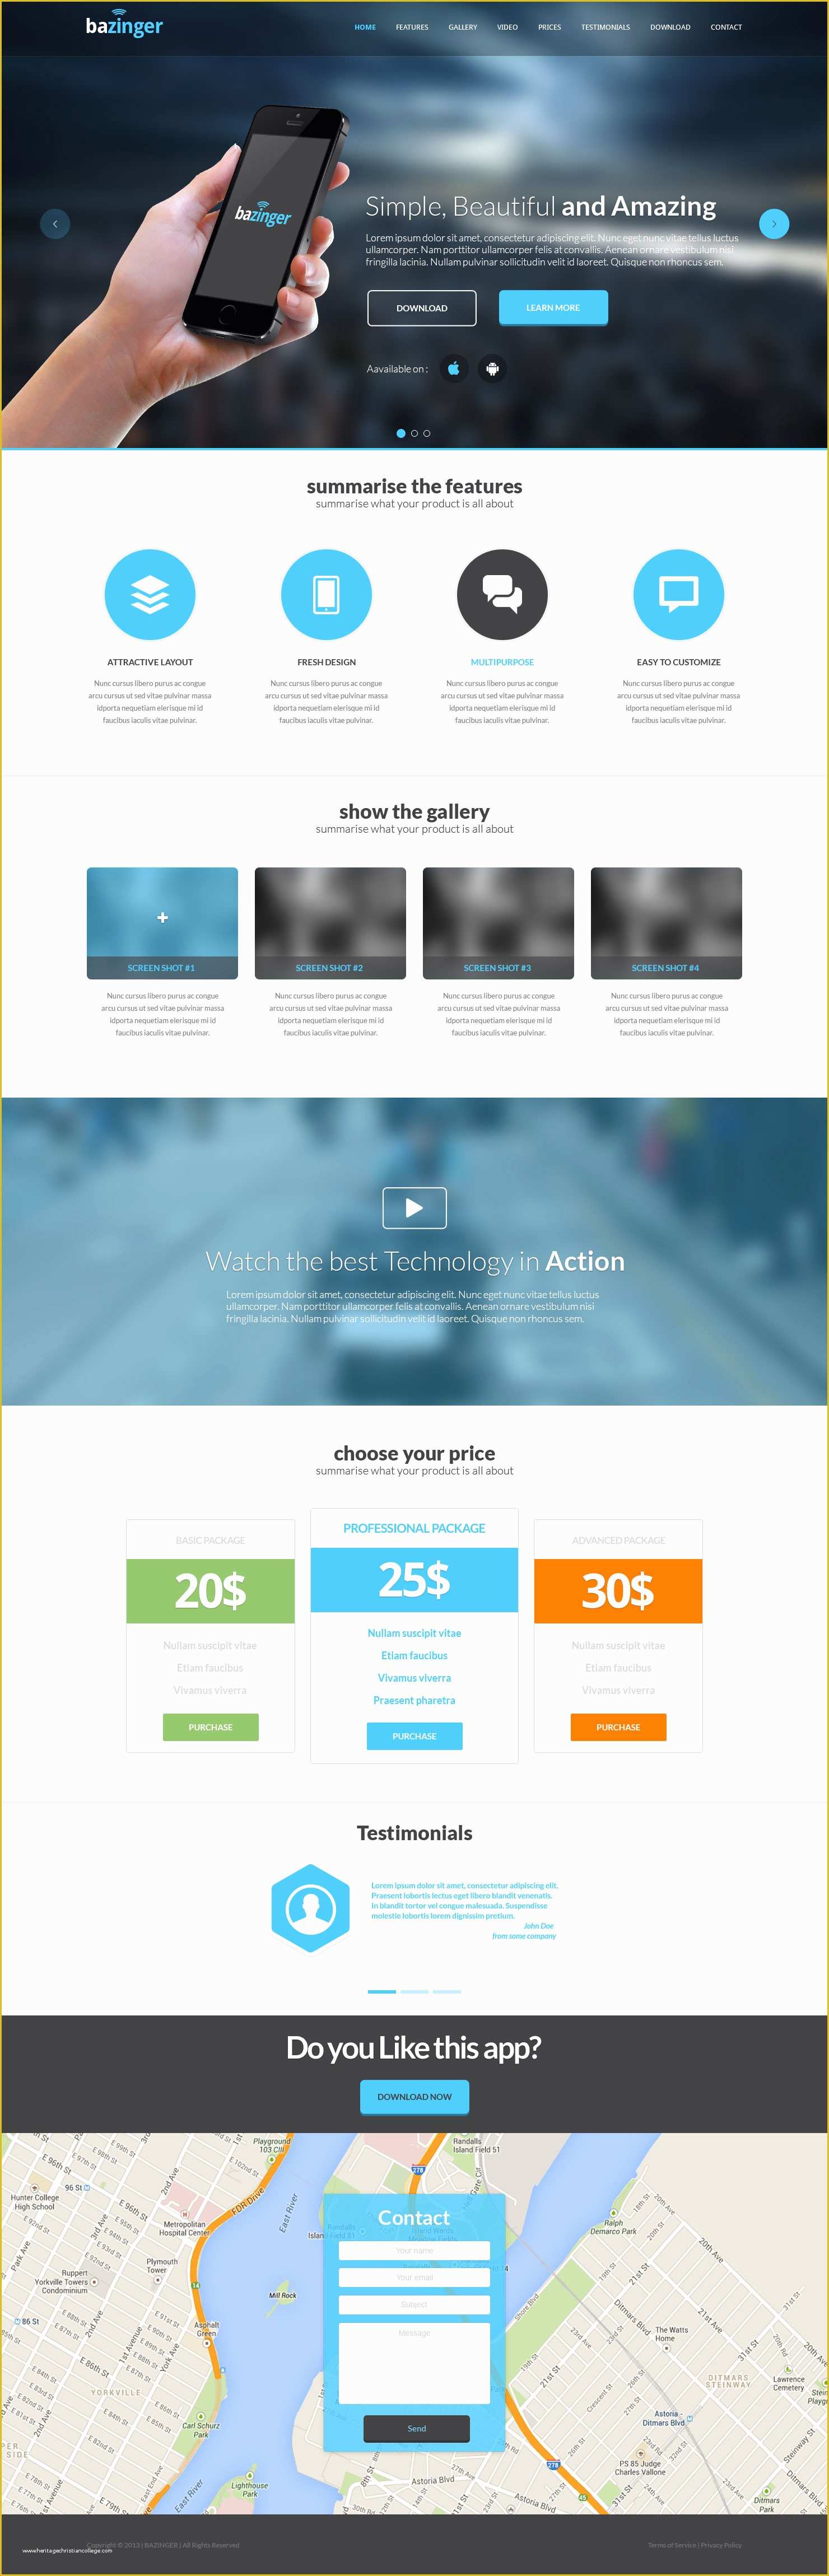 Html Landing Page Templates Free Of Bazinger Landing Page Free HTML Template